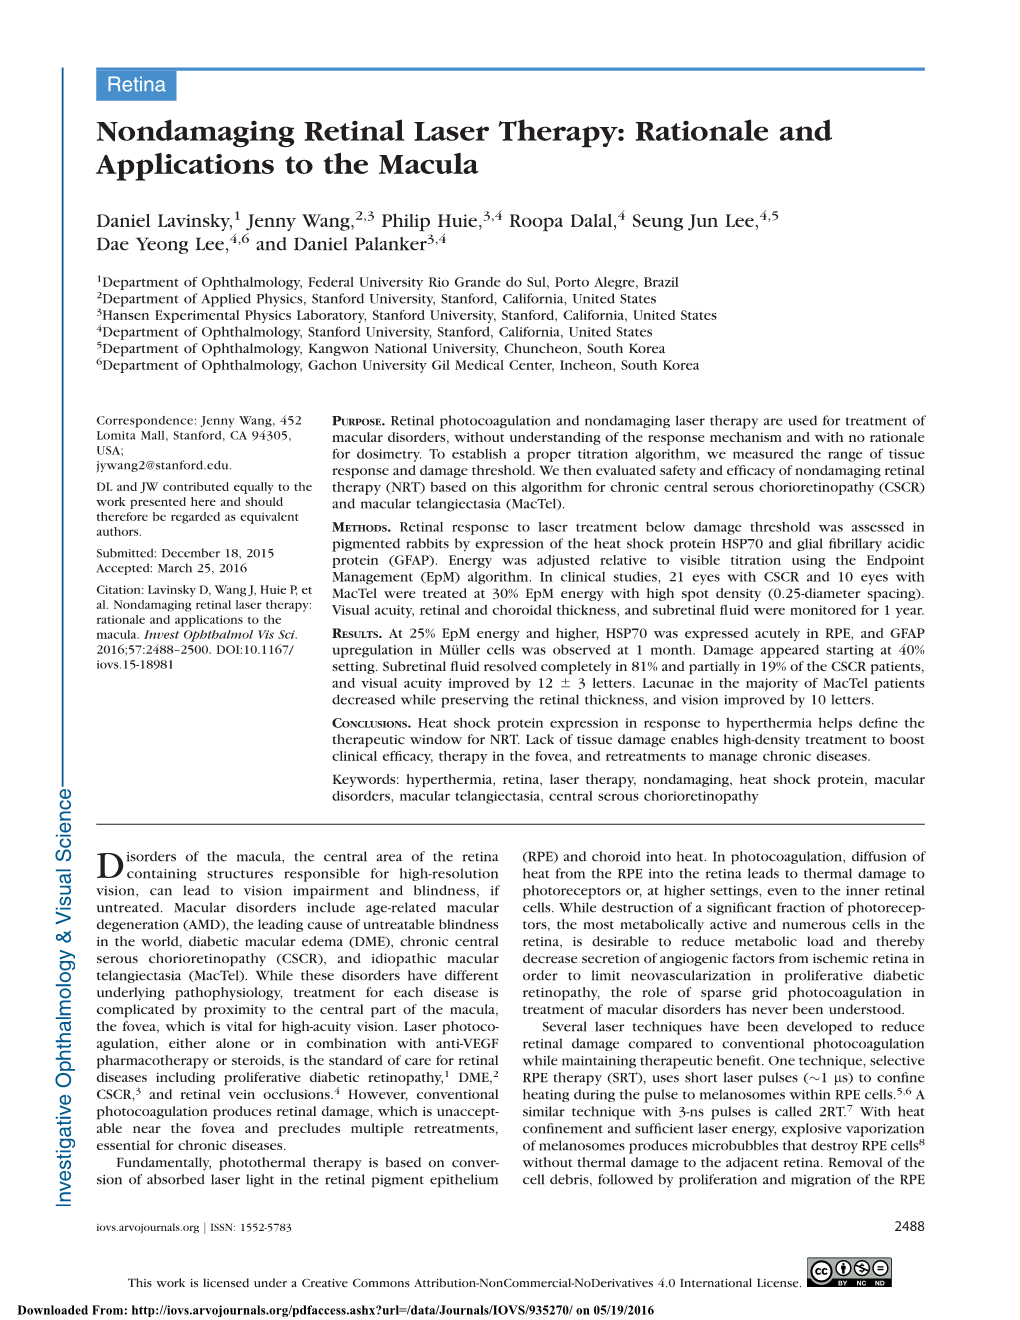 Rationale and Applications to the Macula